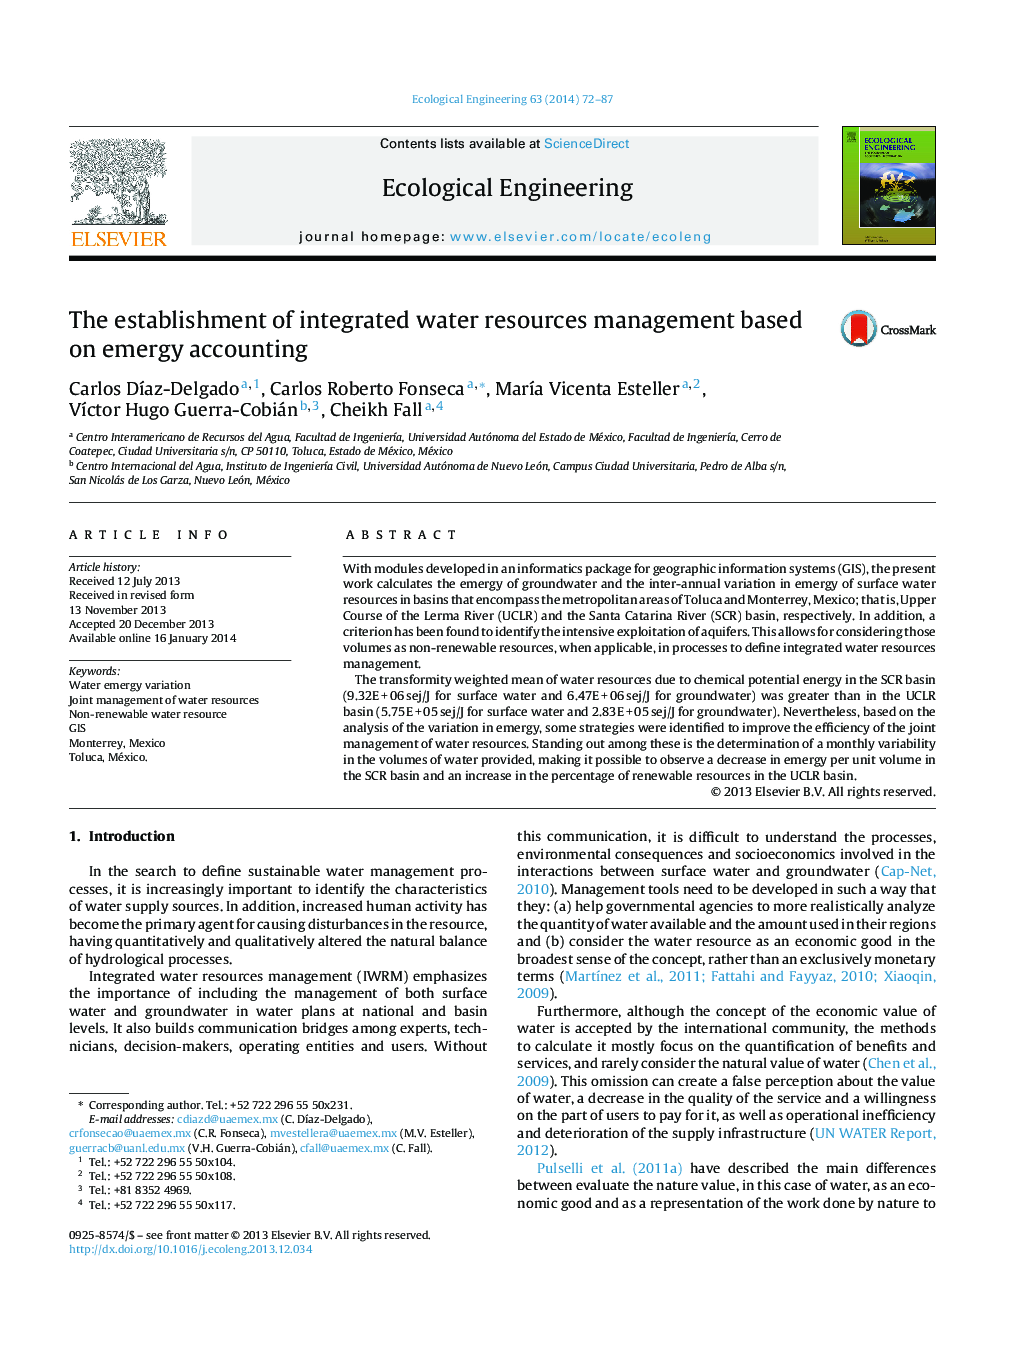 The establishment of integrated water resources management based on emergy accounting